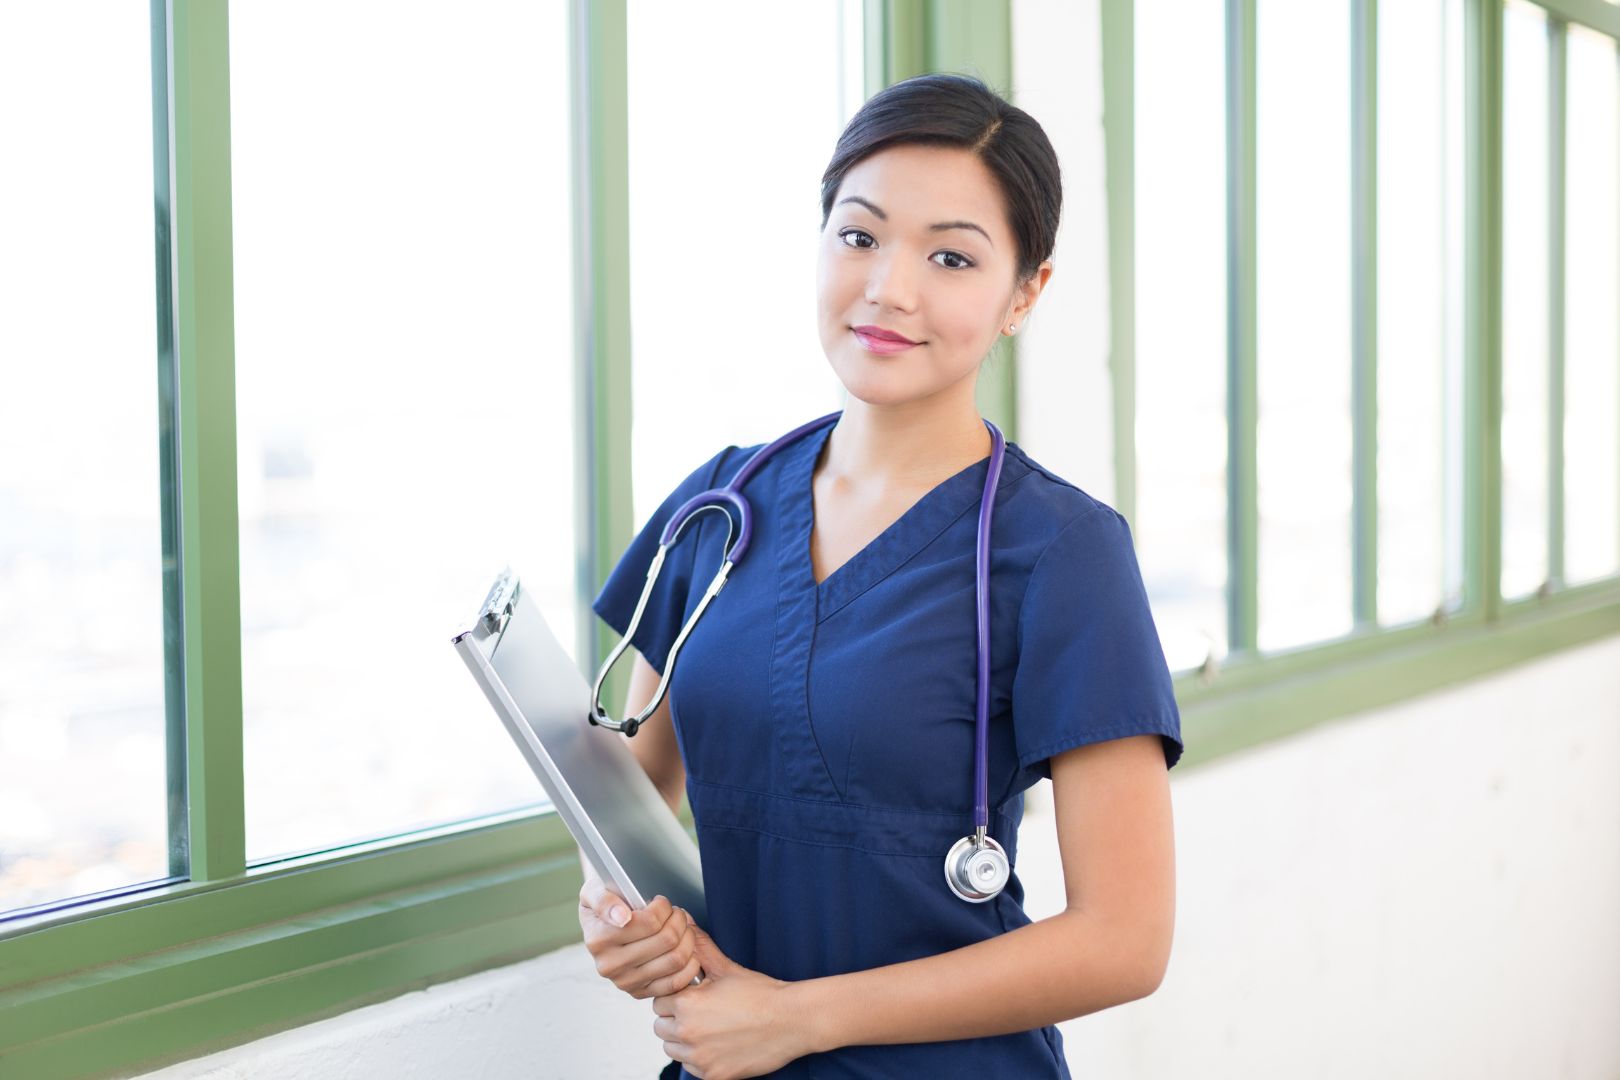 How Long Should a New Nurse be Oriented?